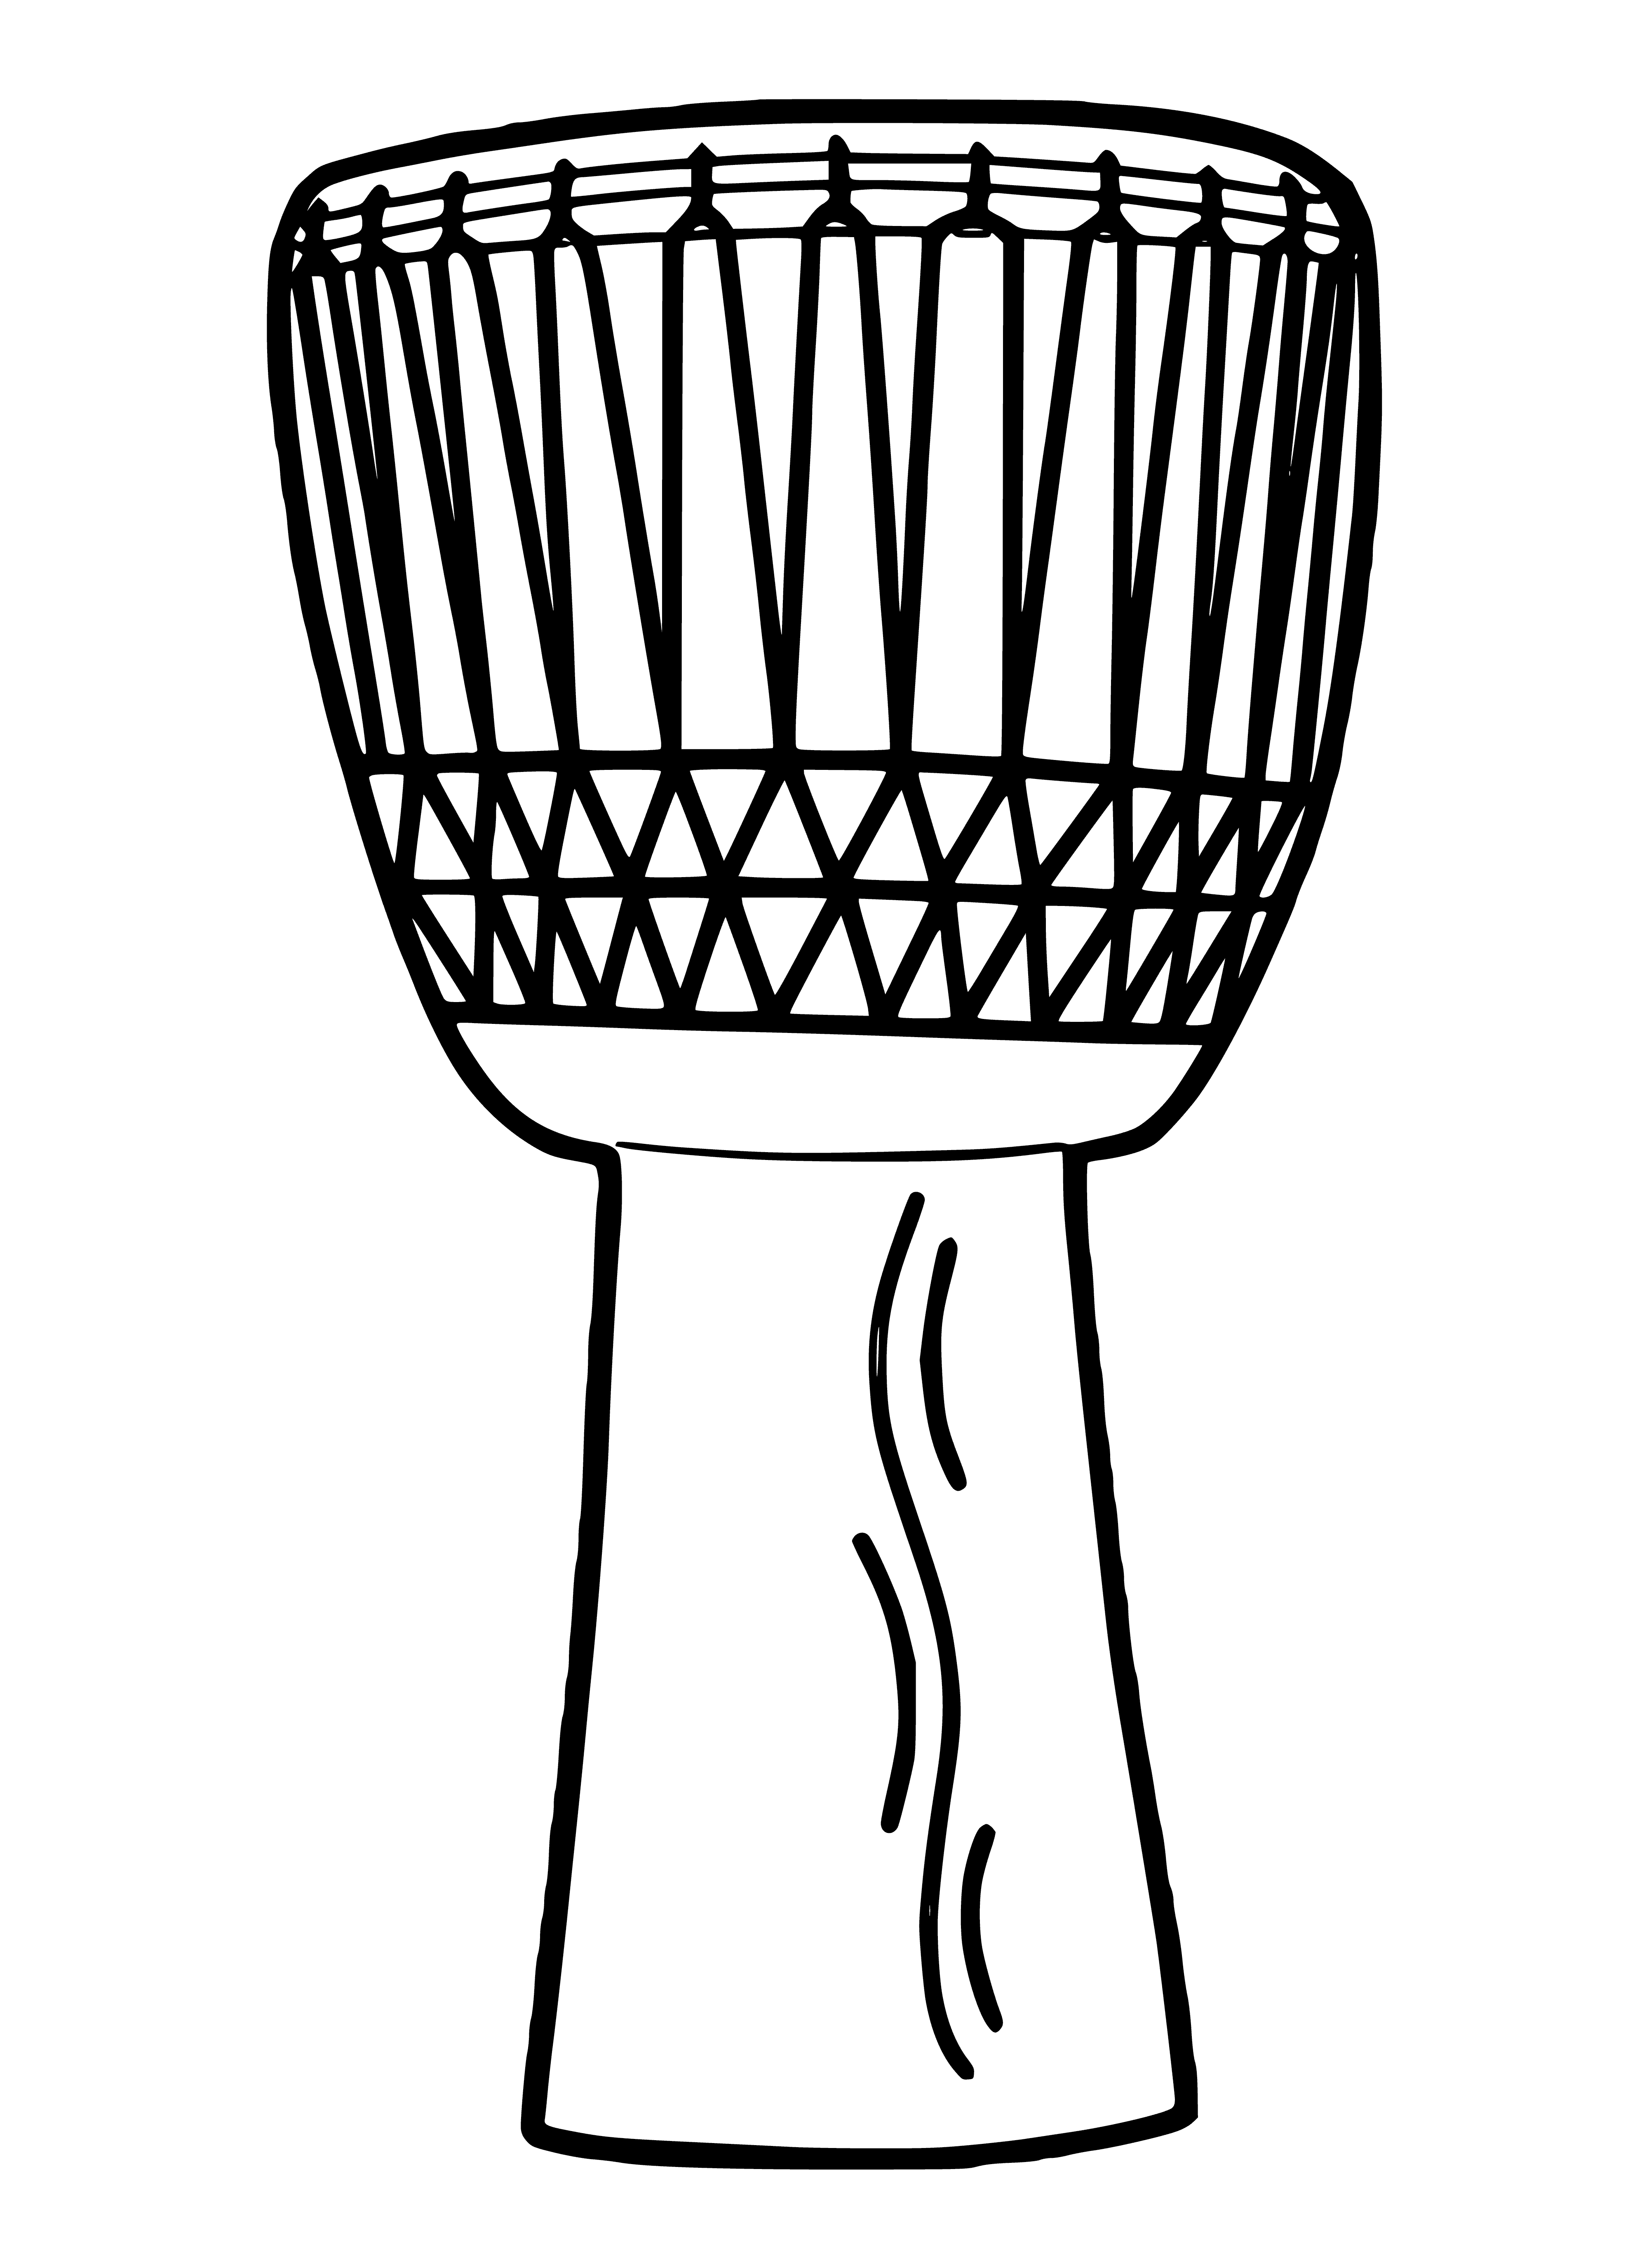 coloring page: Handheld drum played by striking it with hands, made of wooden frame and goat skin. Commonly used in traditional African music, gospel, jazz & reggae.